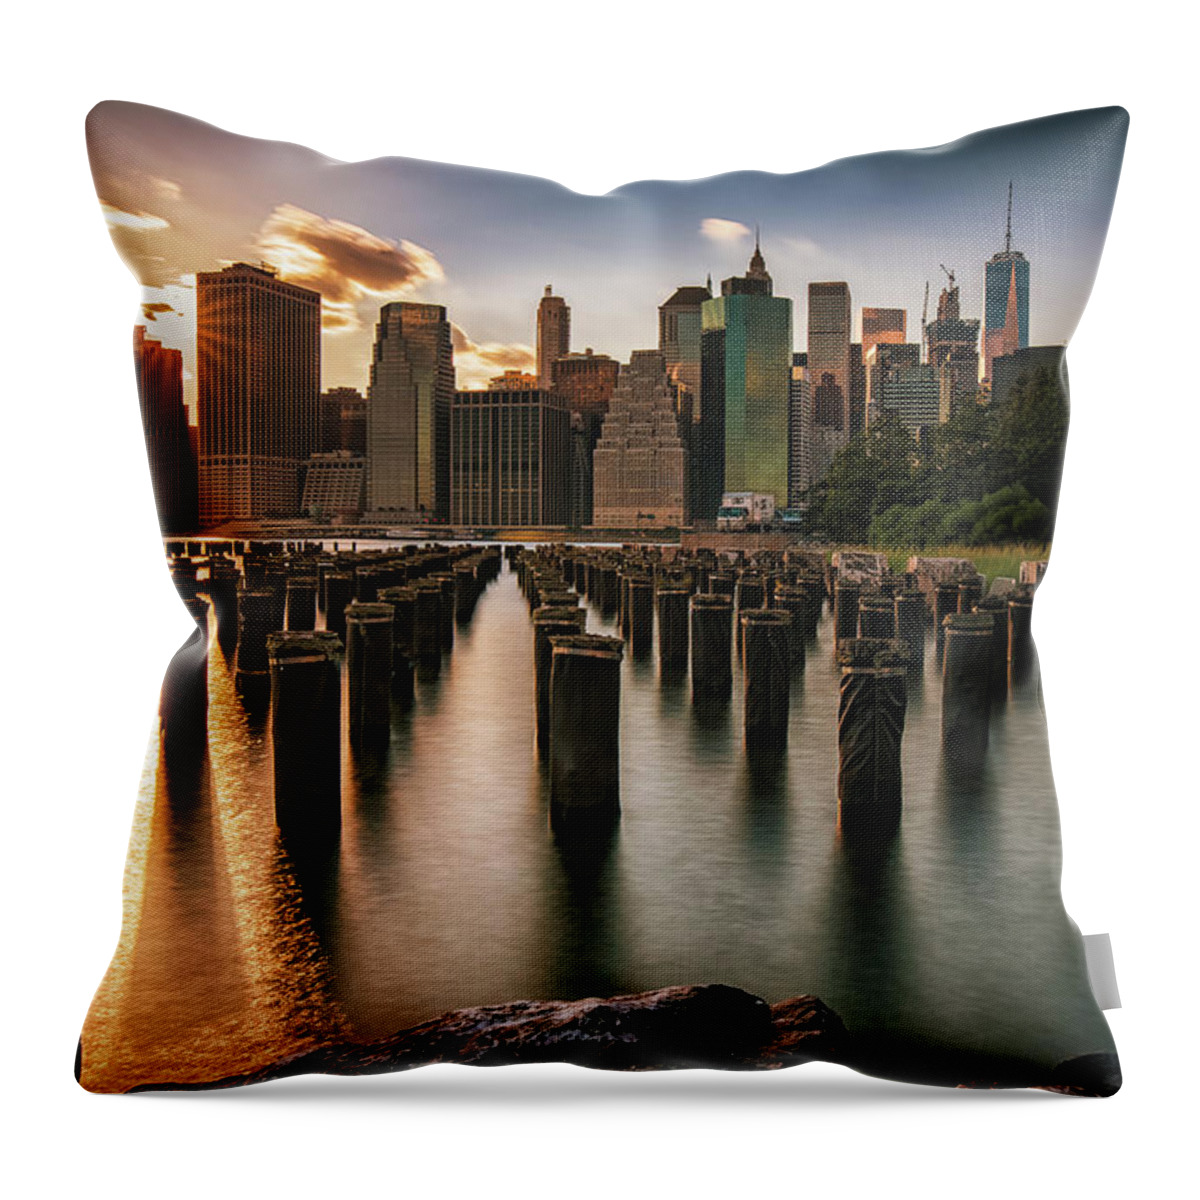 New York City Throw Pillow featuring the photograph Lower Manhattan Sunset Twinkle by Alissa Beth Photography